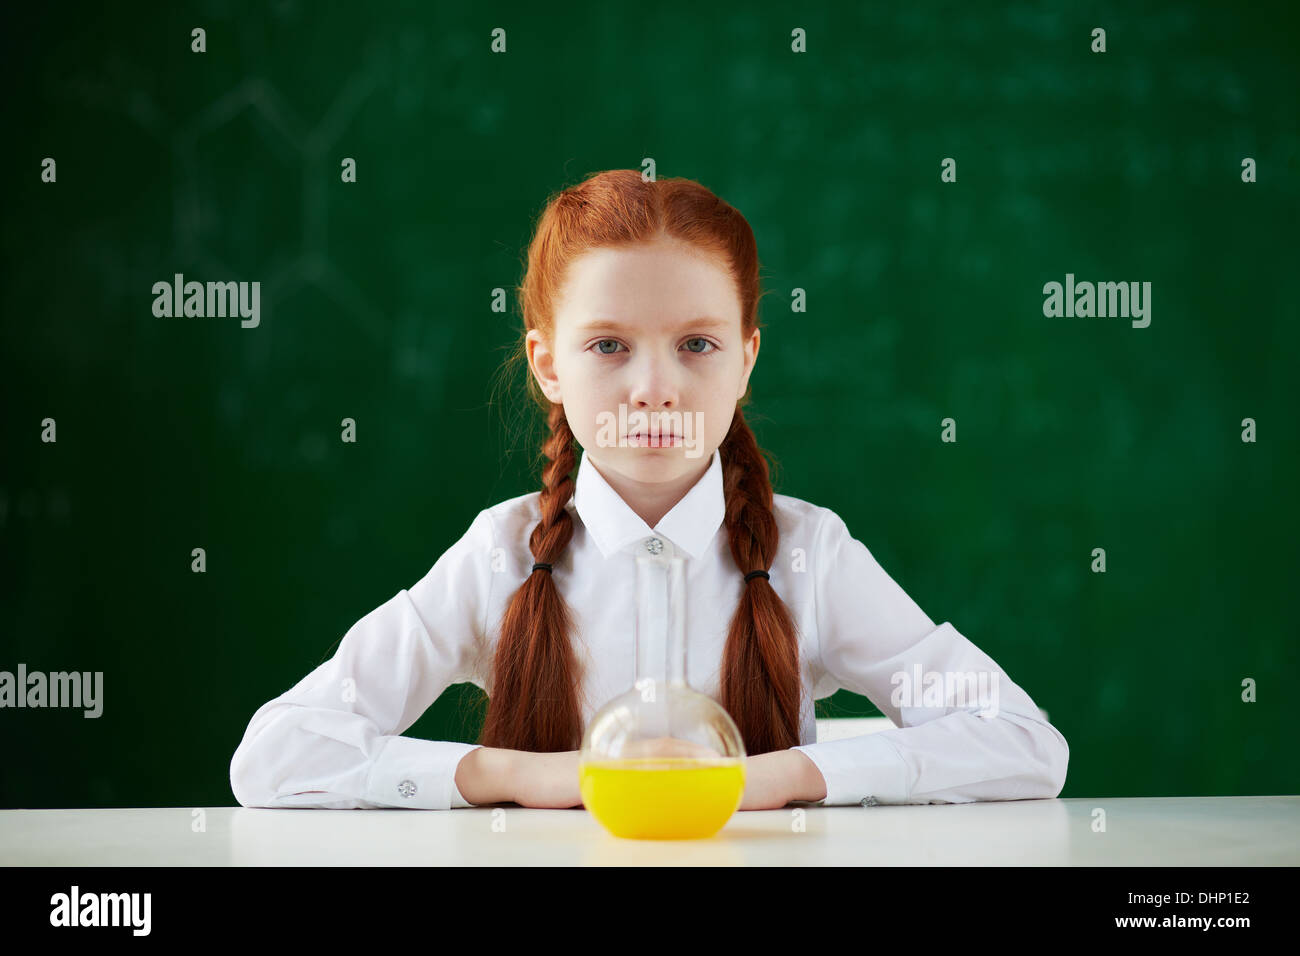 Portrait of schoolgirl sitting at workplace with chemical liquid in front Stock Photo